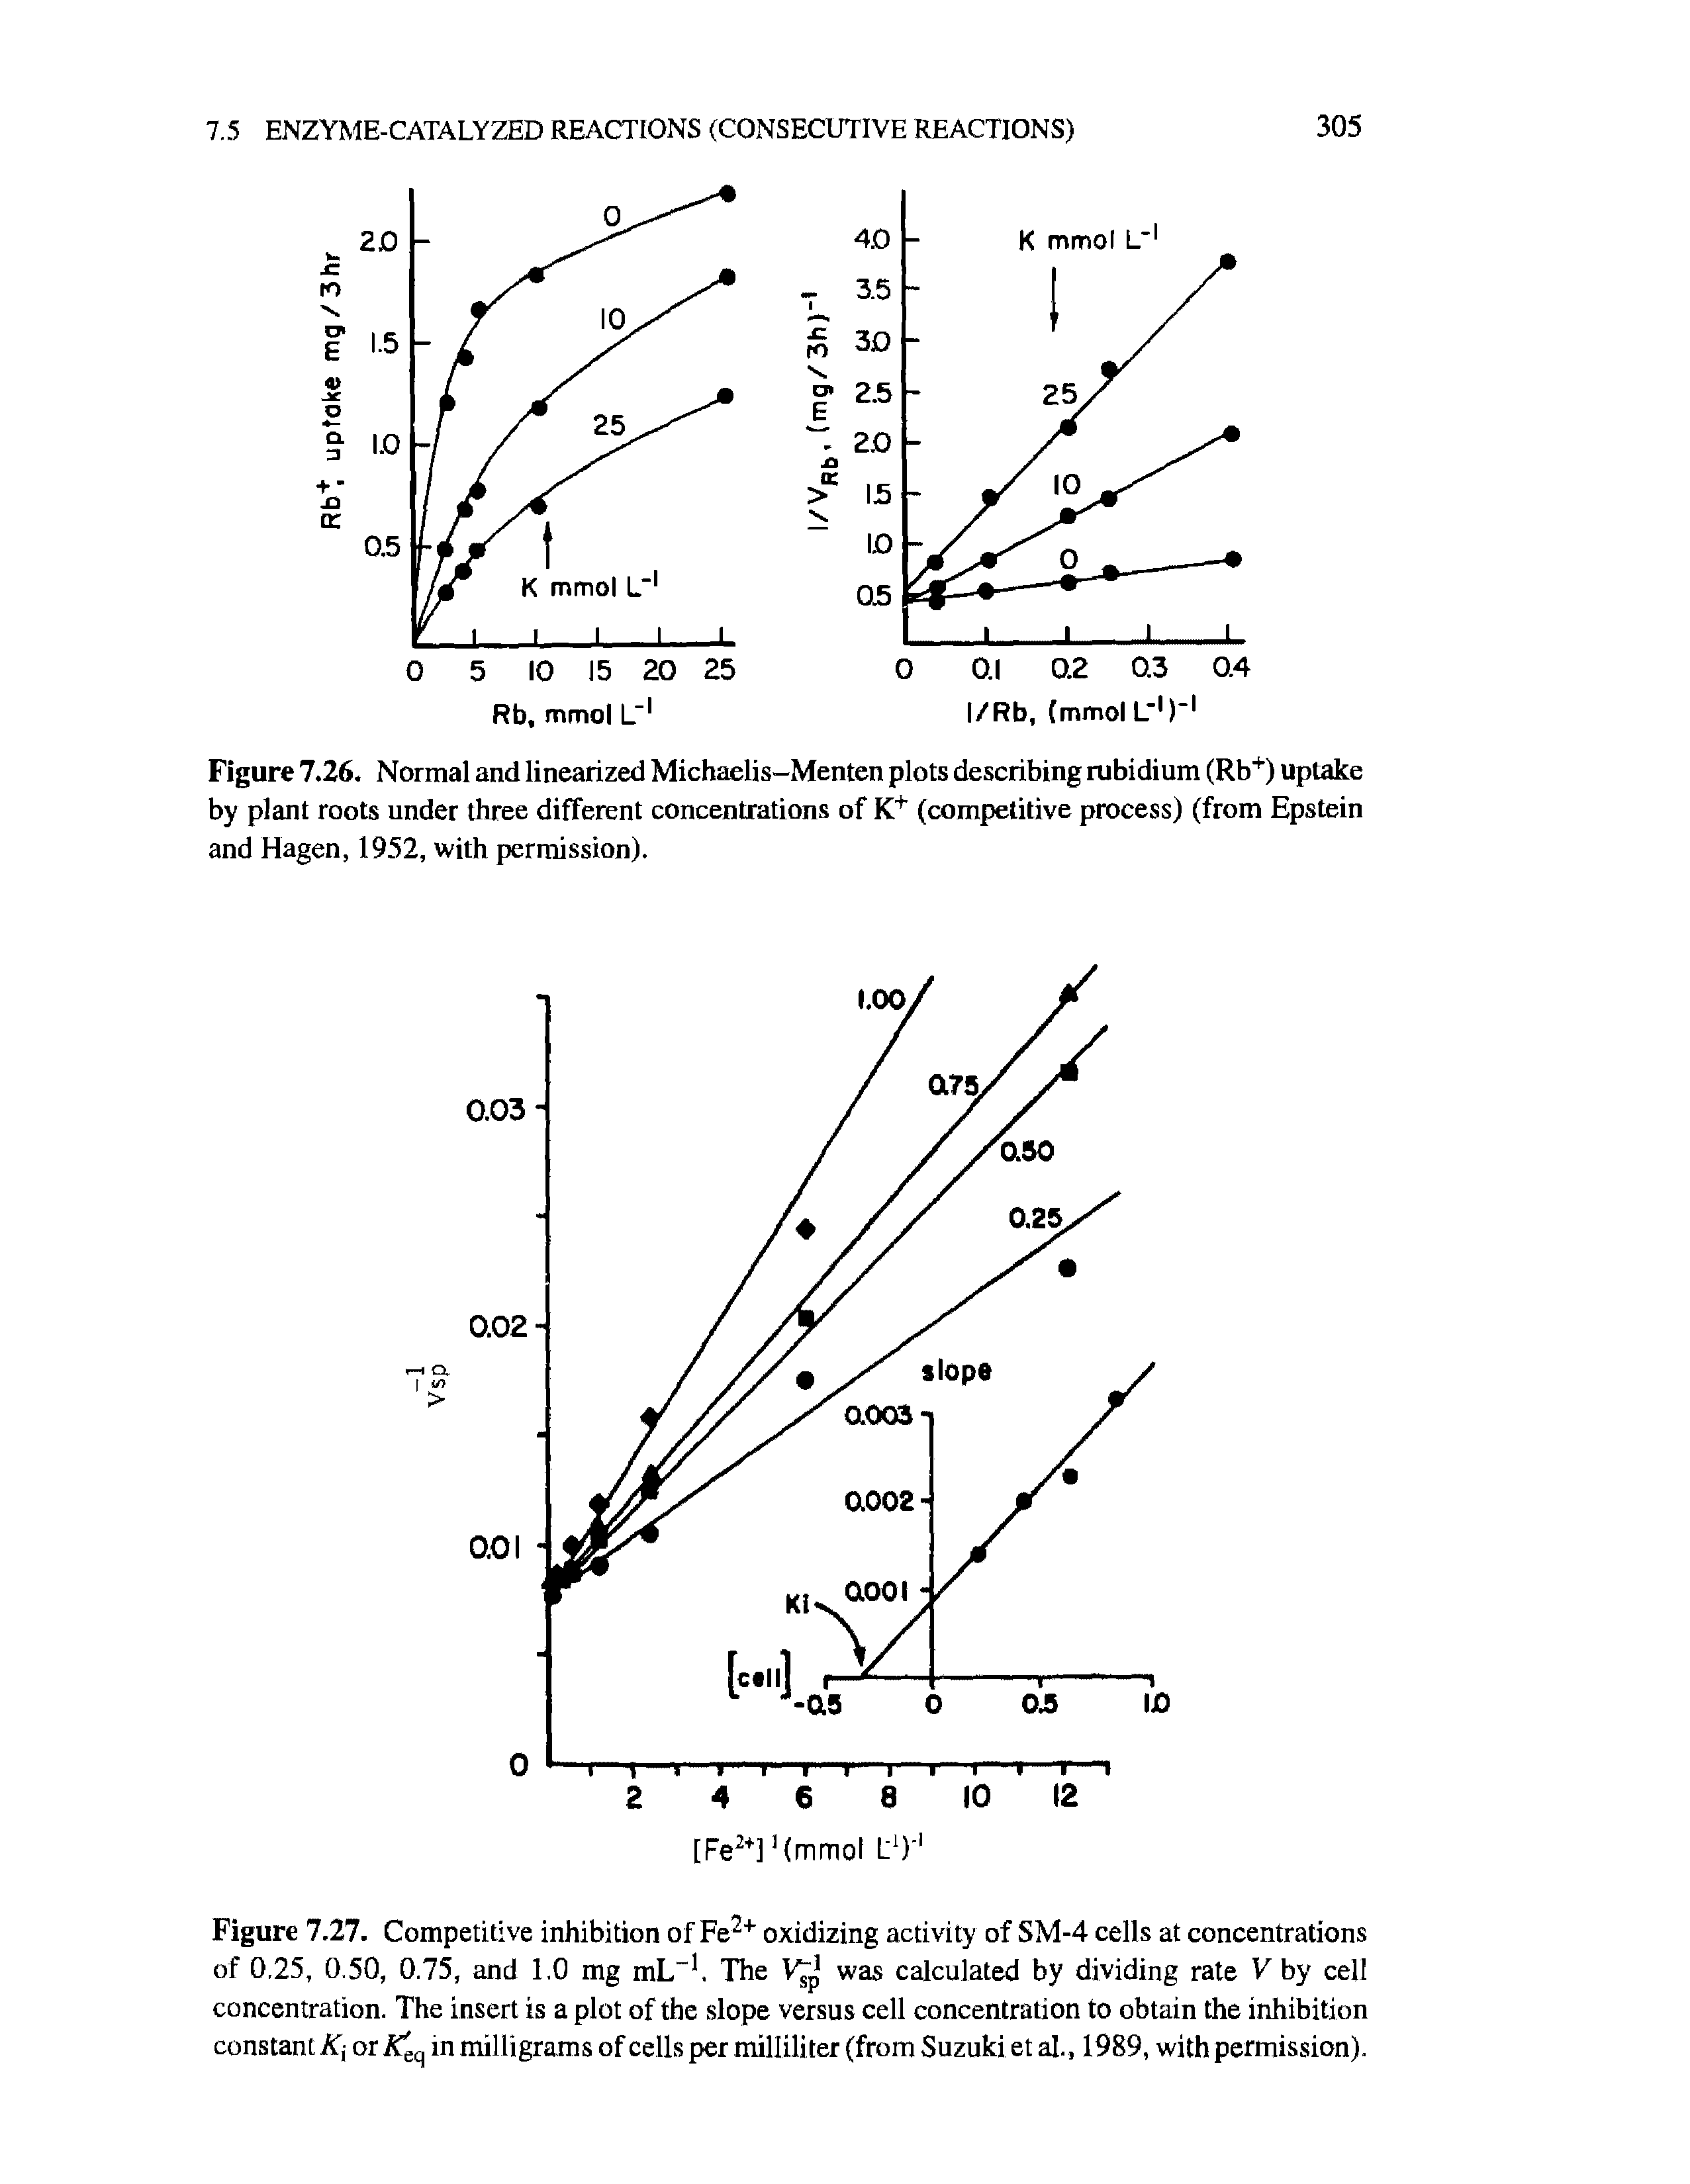 Figure 7.26. Normal and linearized Michaelis-Menten plots describing rubidium (Rb+) uptake by plant roots under three different concentrations of K+ (competitive process) (from Epstein and Hagen, 1952, with permission).